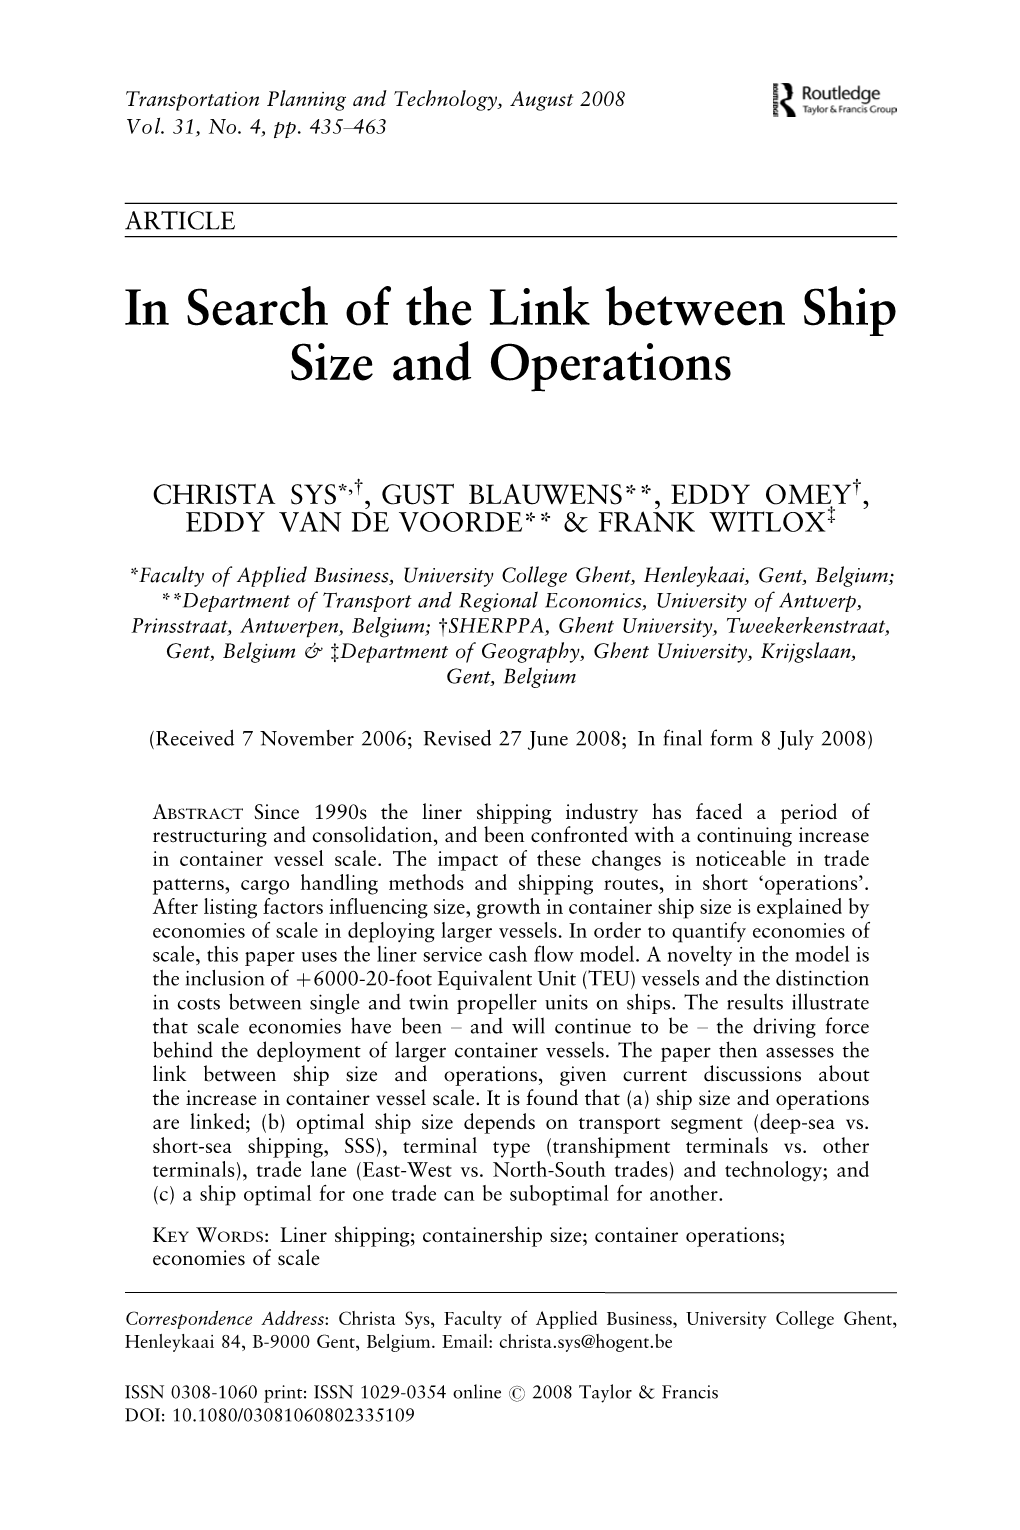 In Search of the Link Between Ship Size and Operations